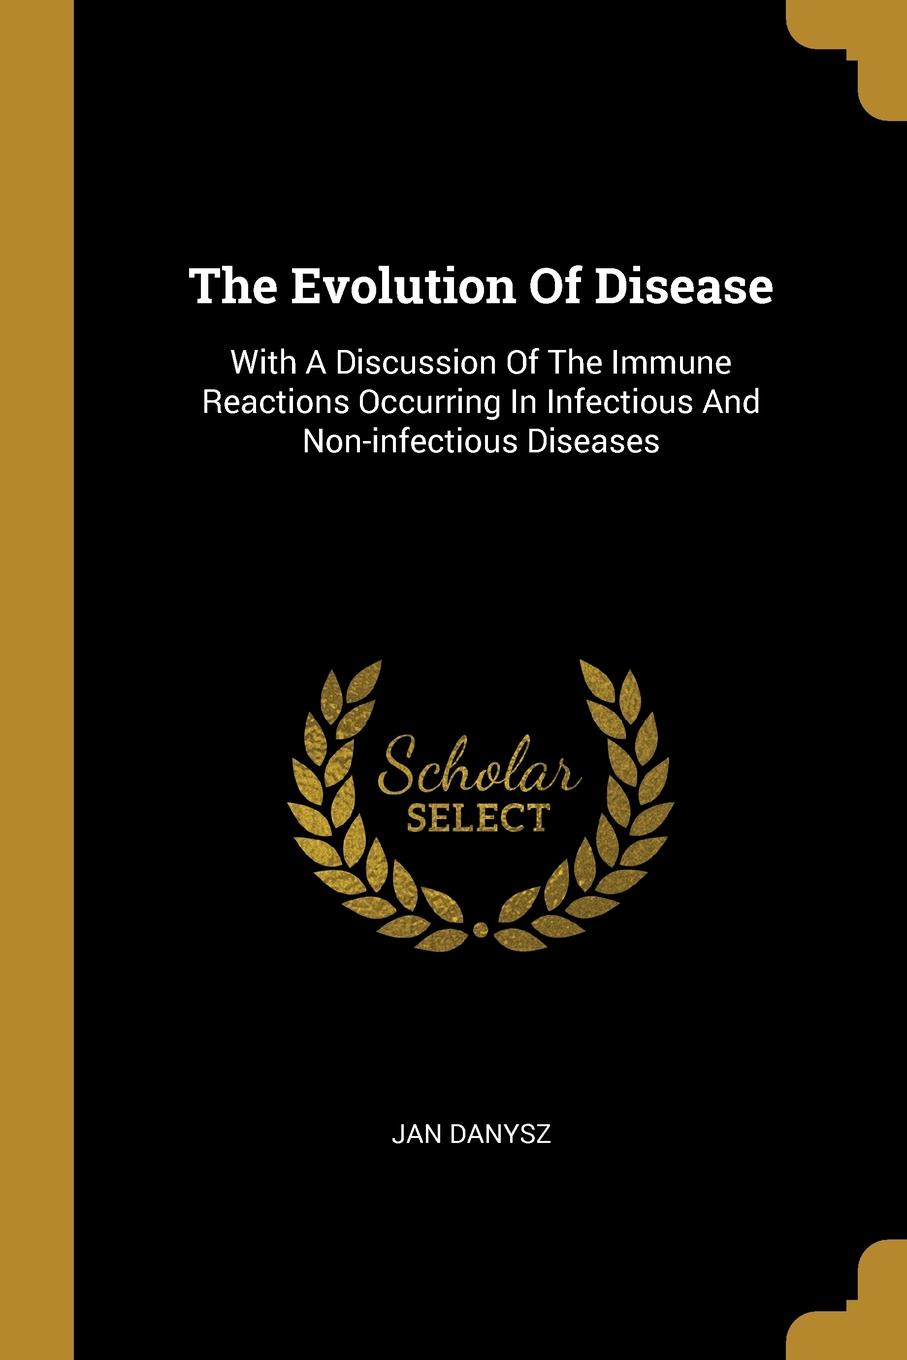 The Evolution Of Disease. With A Discussion Of The Immune Reactions Occurring In Infectious And Non-infectious Diseases